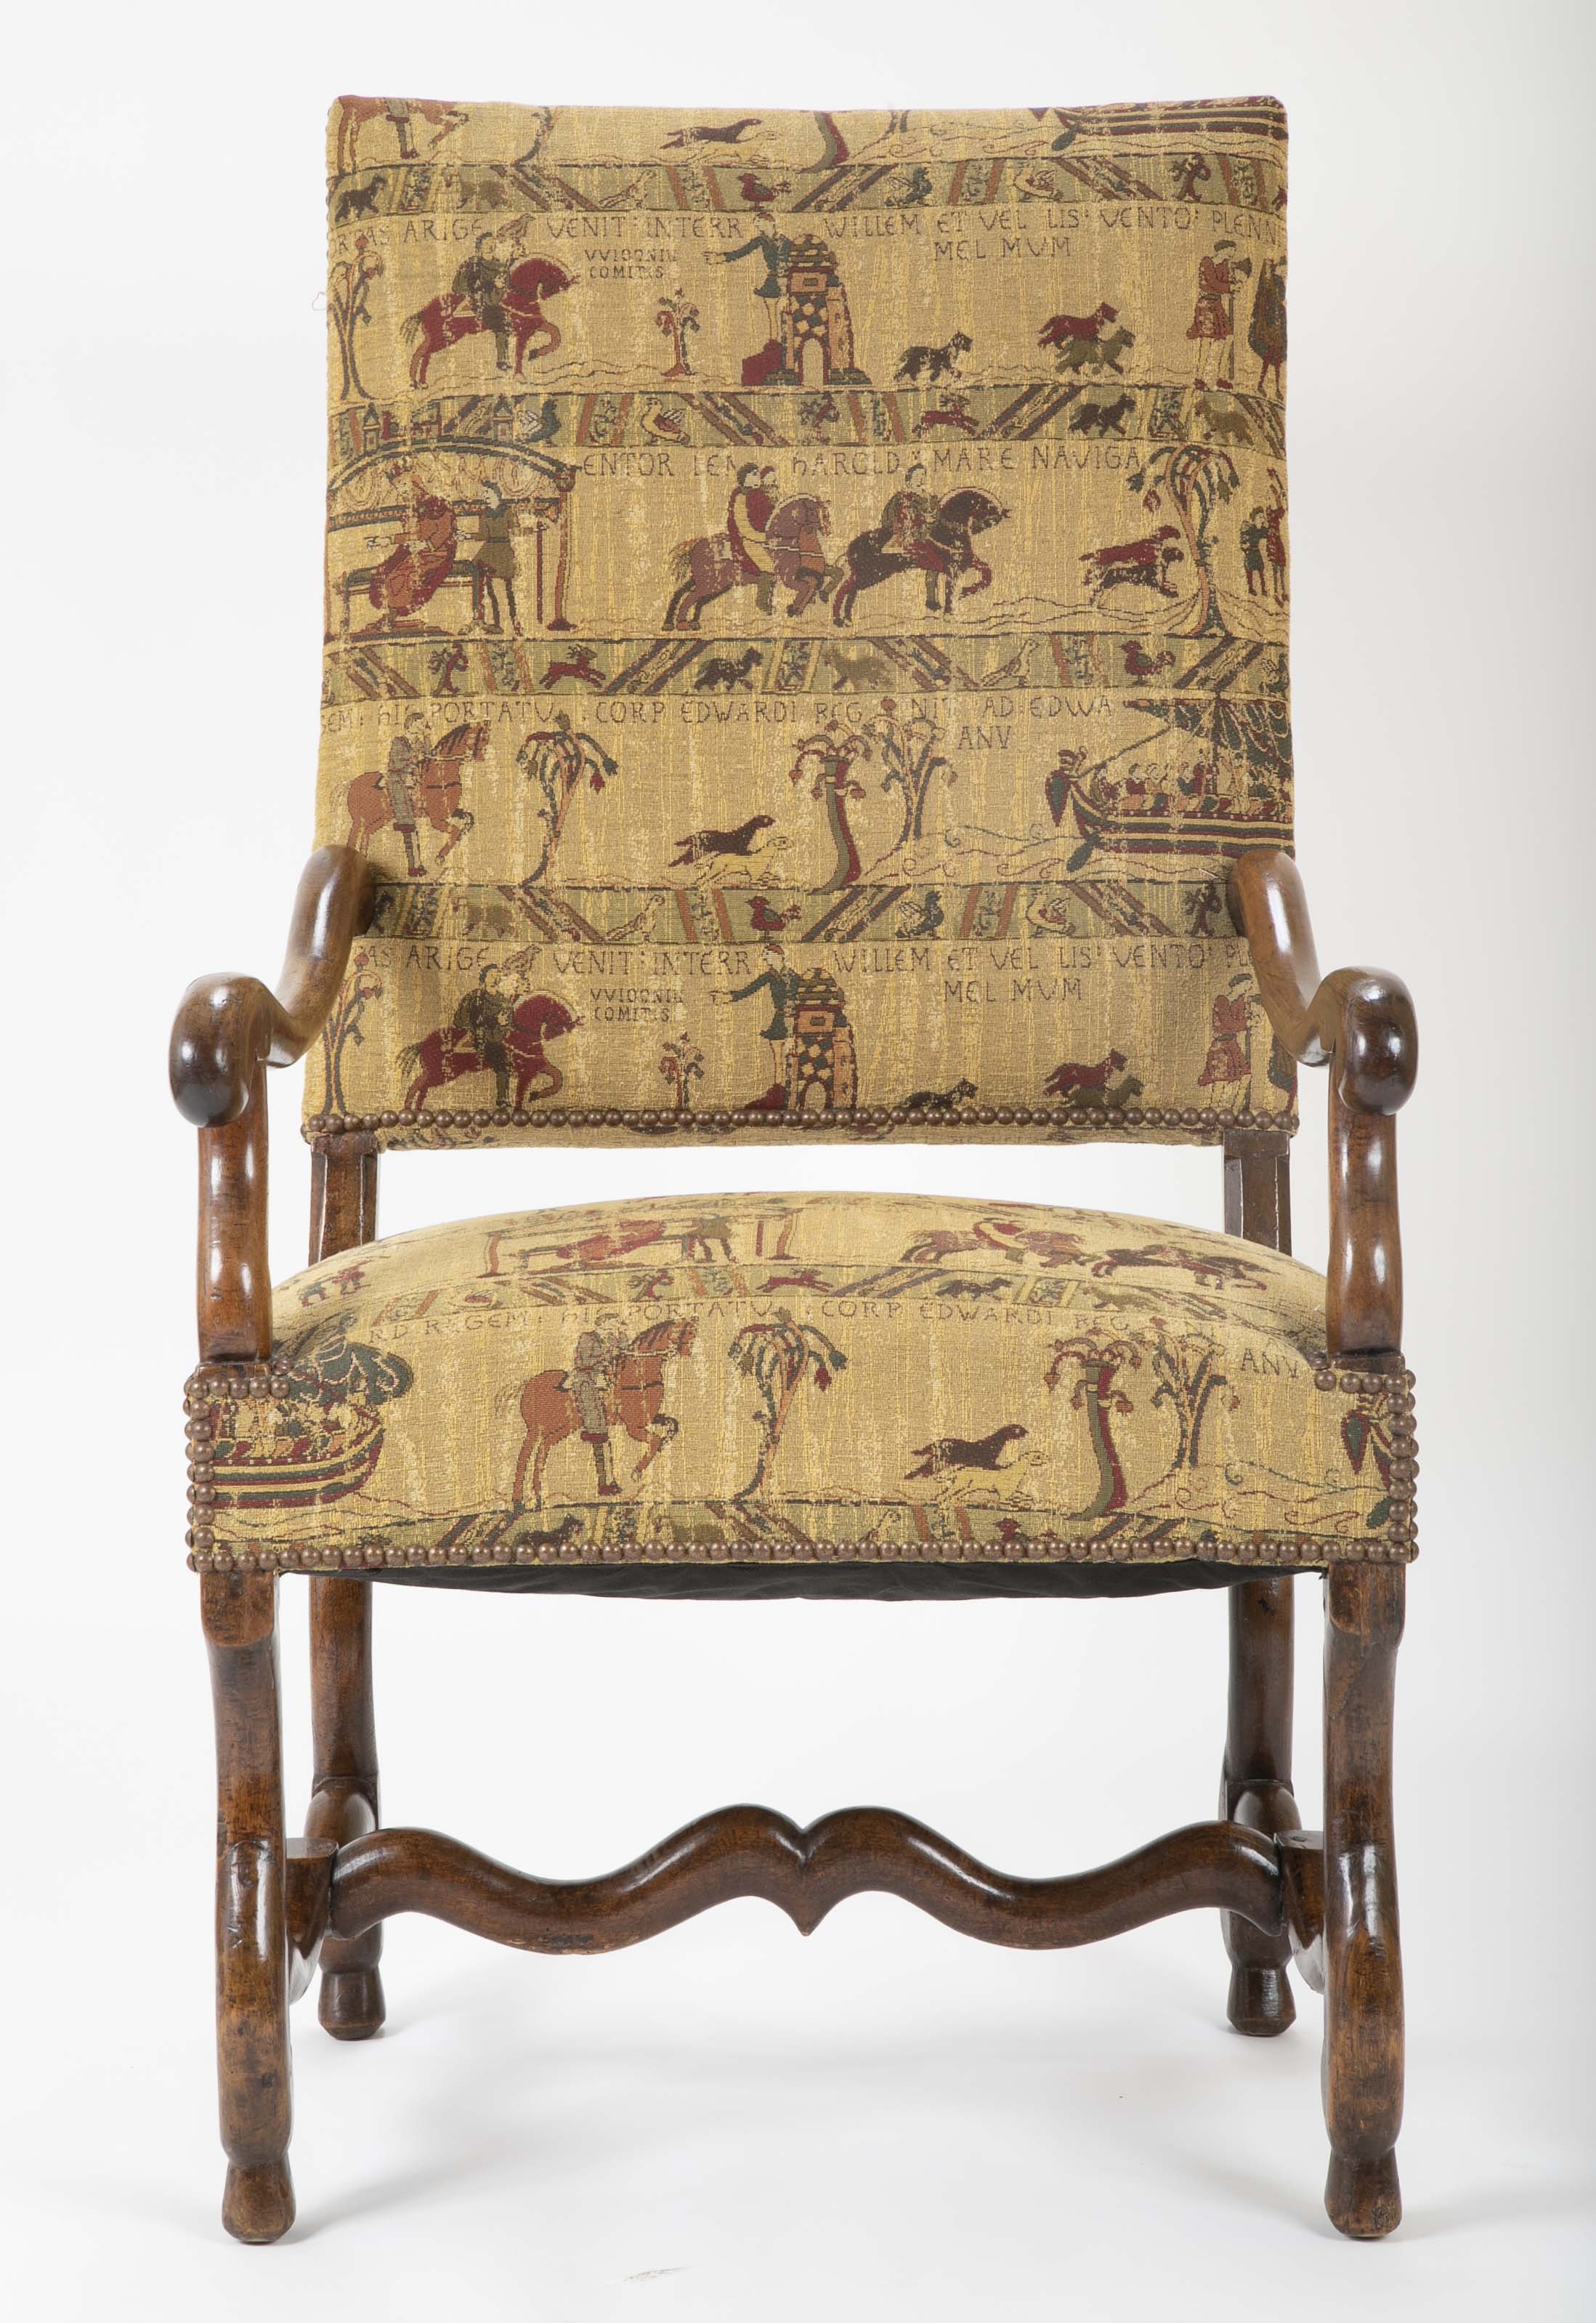 A French Louis XIII Style Walnut Arm Chair